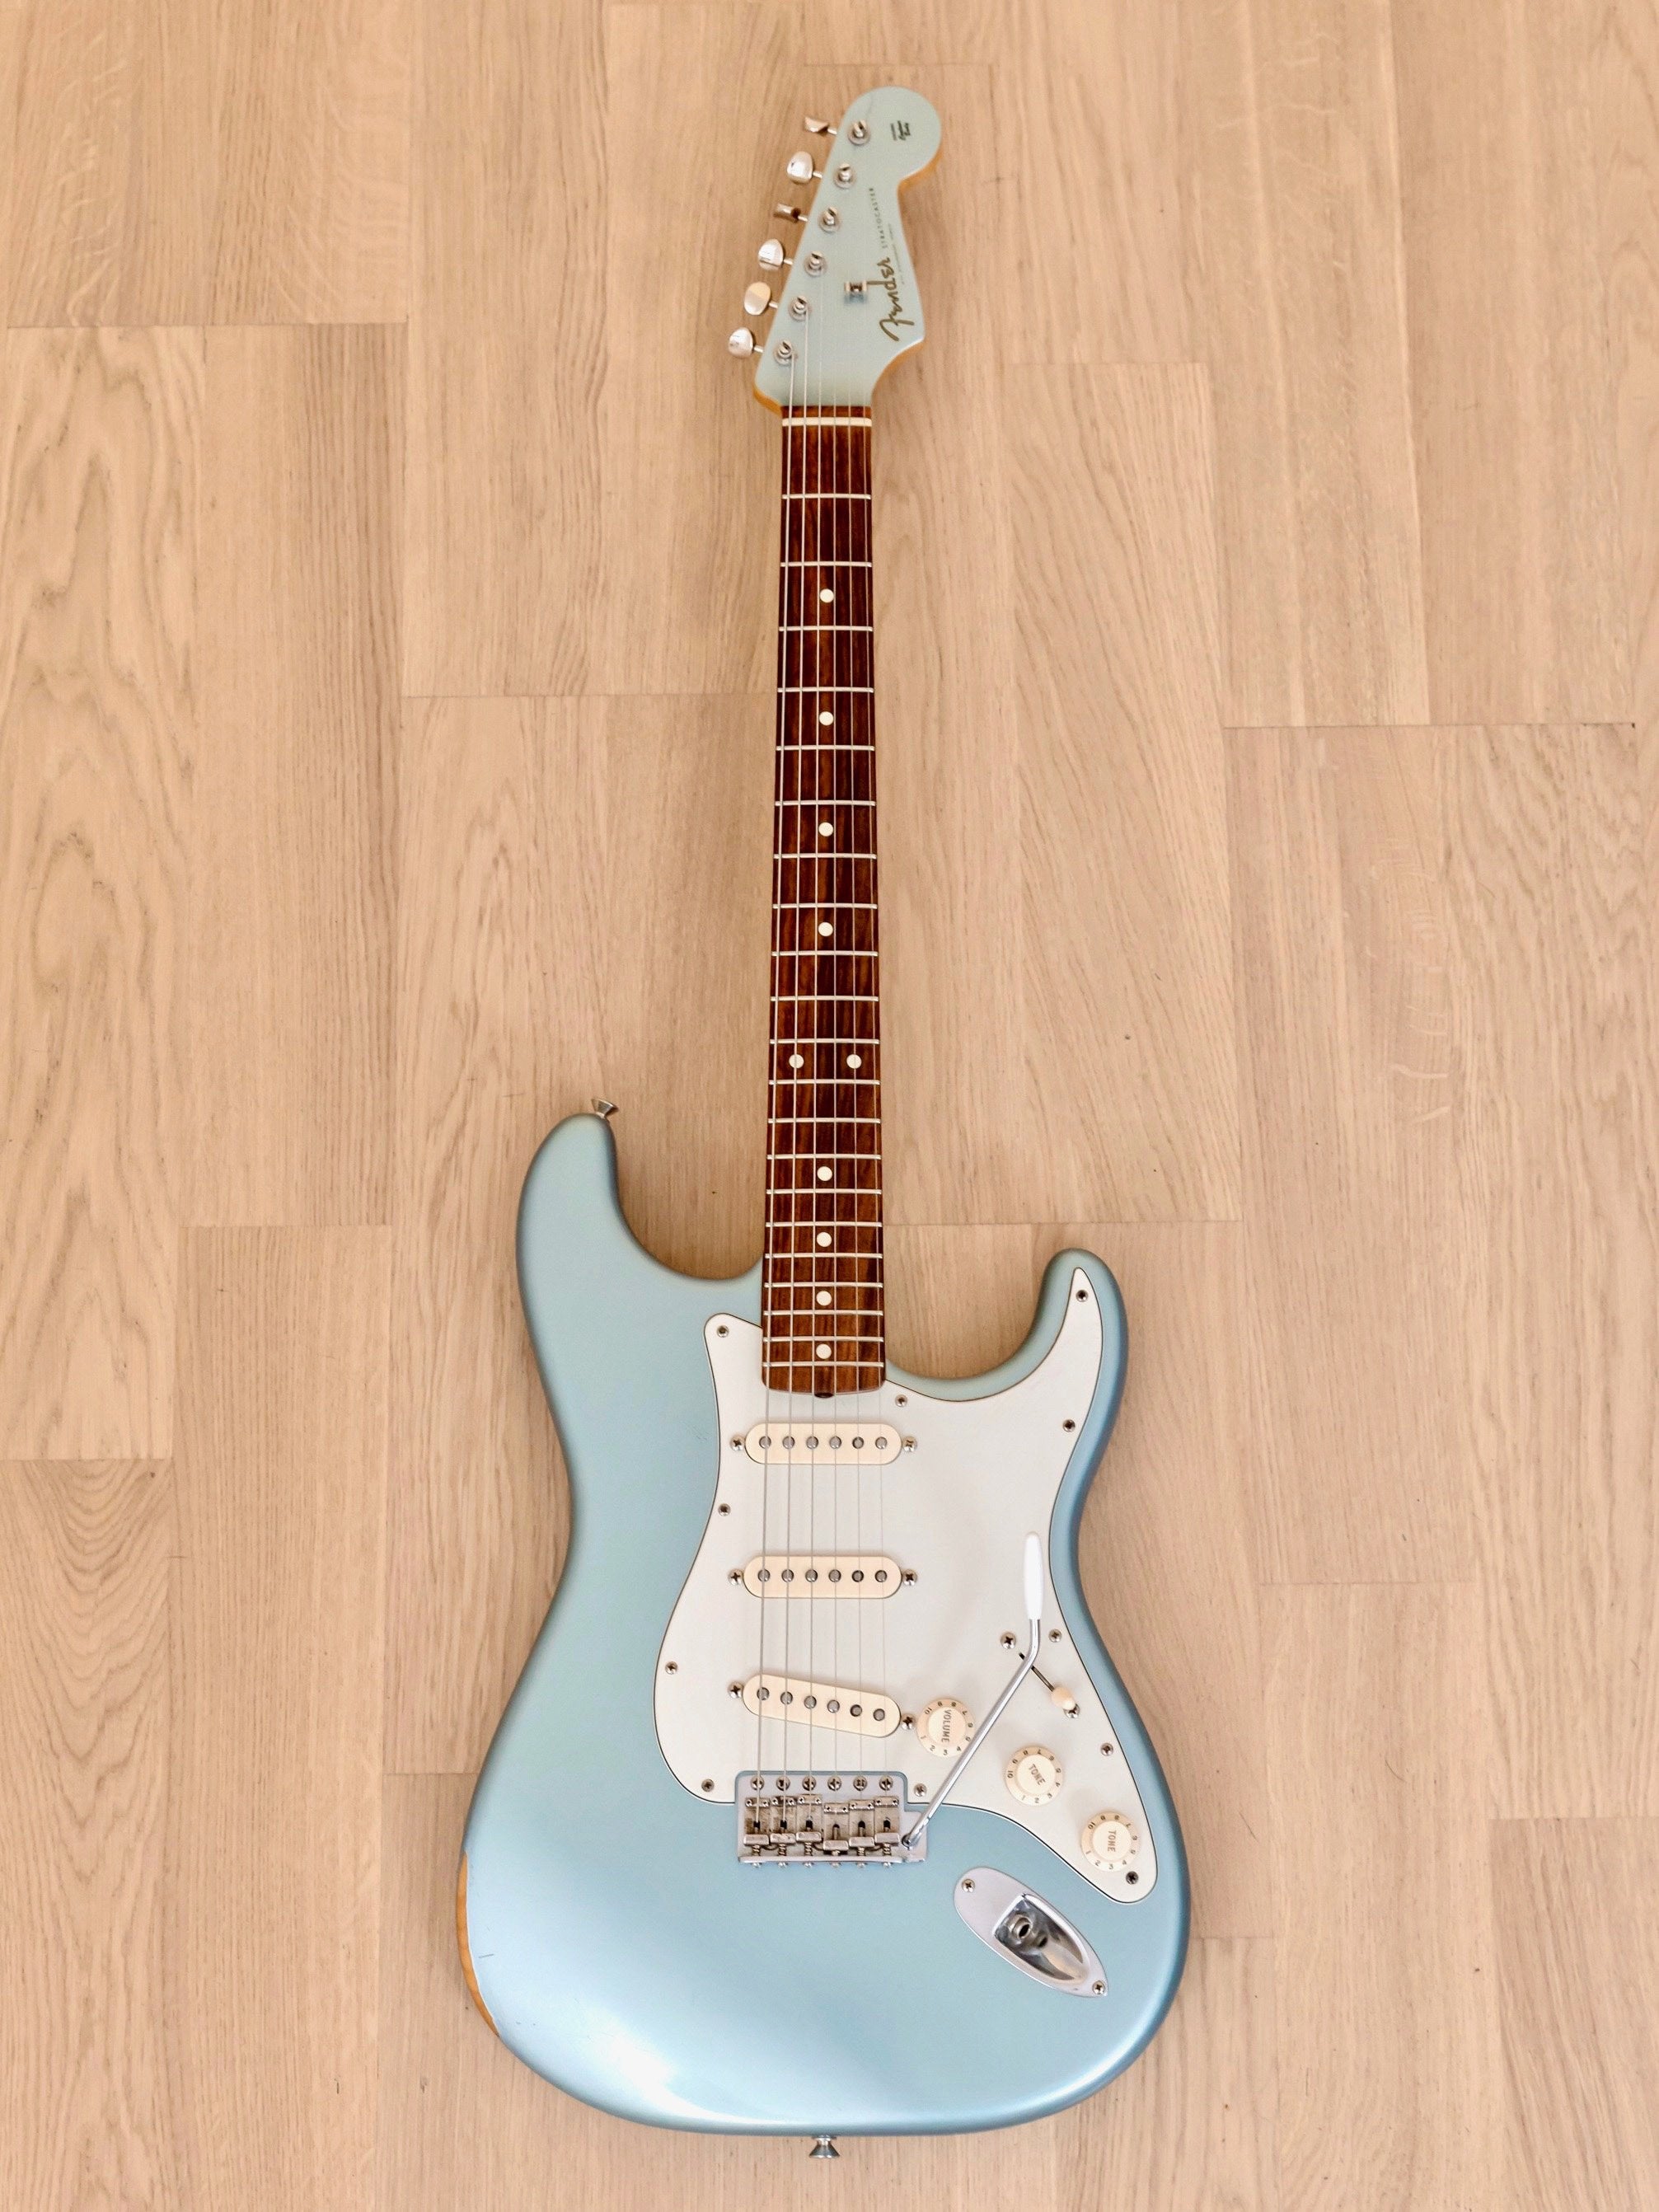 2001 Fender American Vintage '62 Stratocaster Ice Blue w/ Matching Headstock, 1 of 75 Mars Music w/ Case